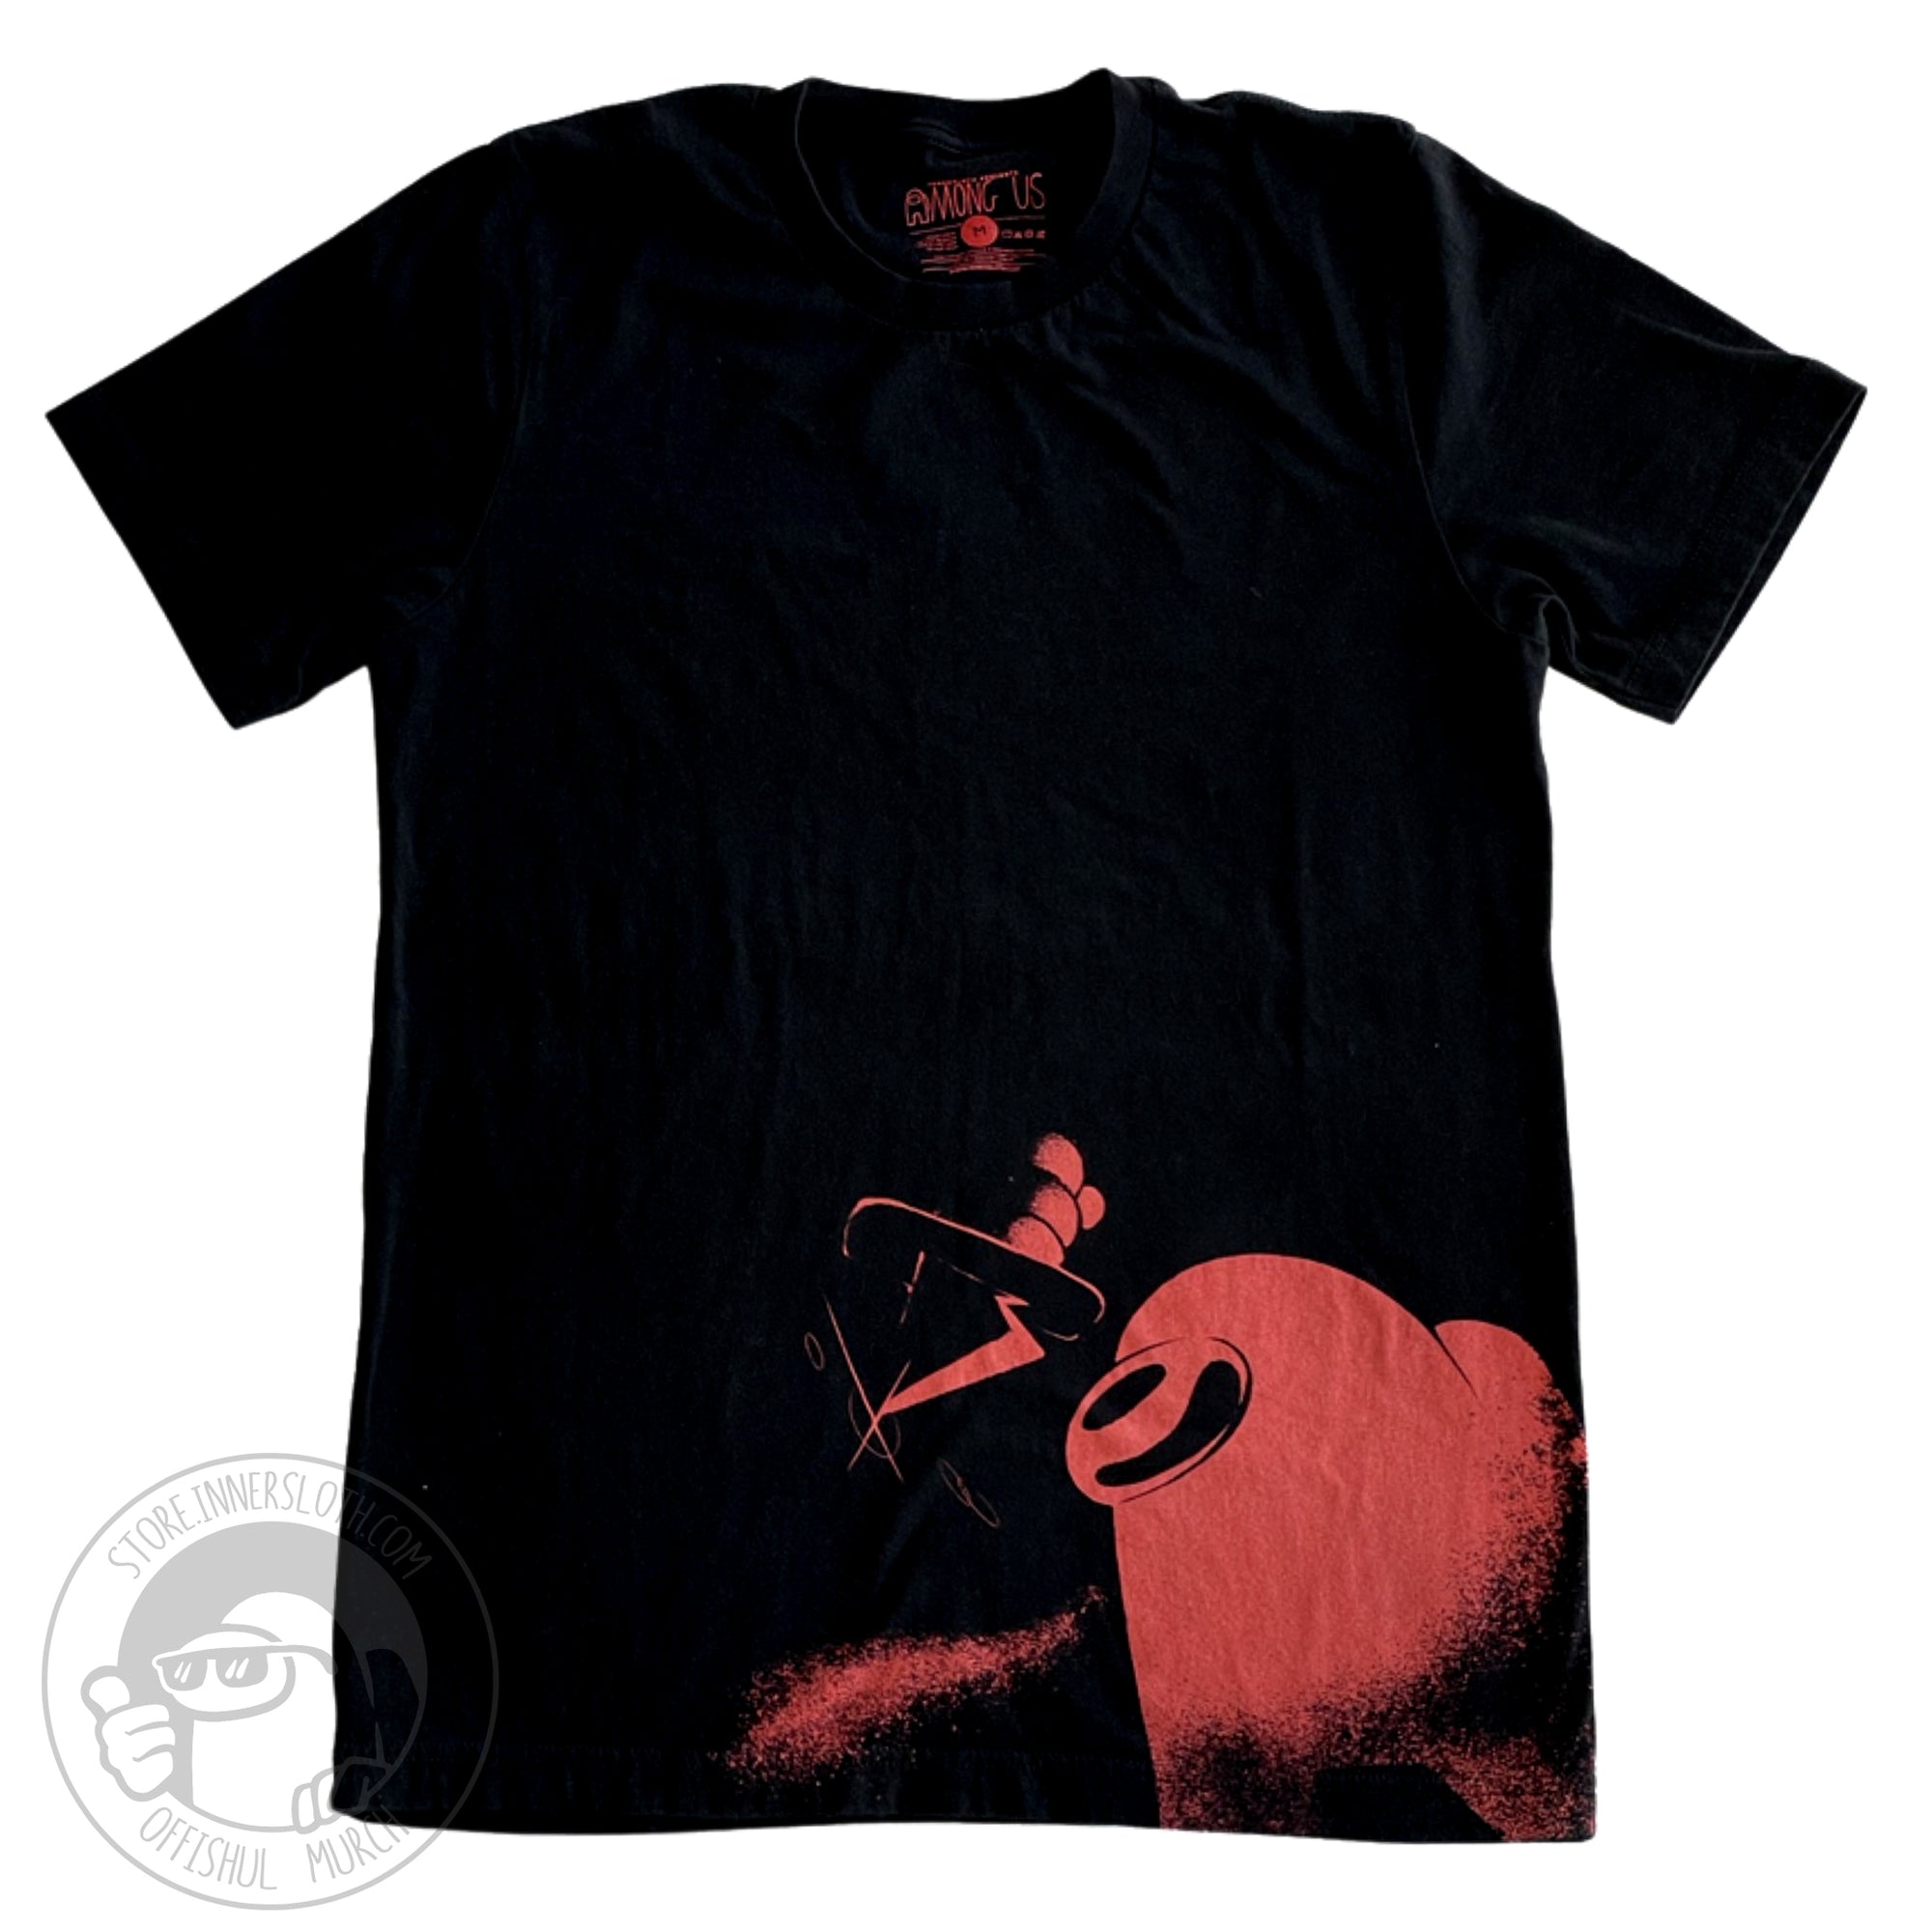 A flat lay photograph of a black t-shirt with a stylized red crewmate holding a dagger at the bottom right corner. The art is stylized to look spray painted.